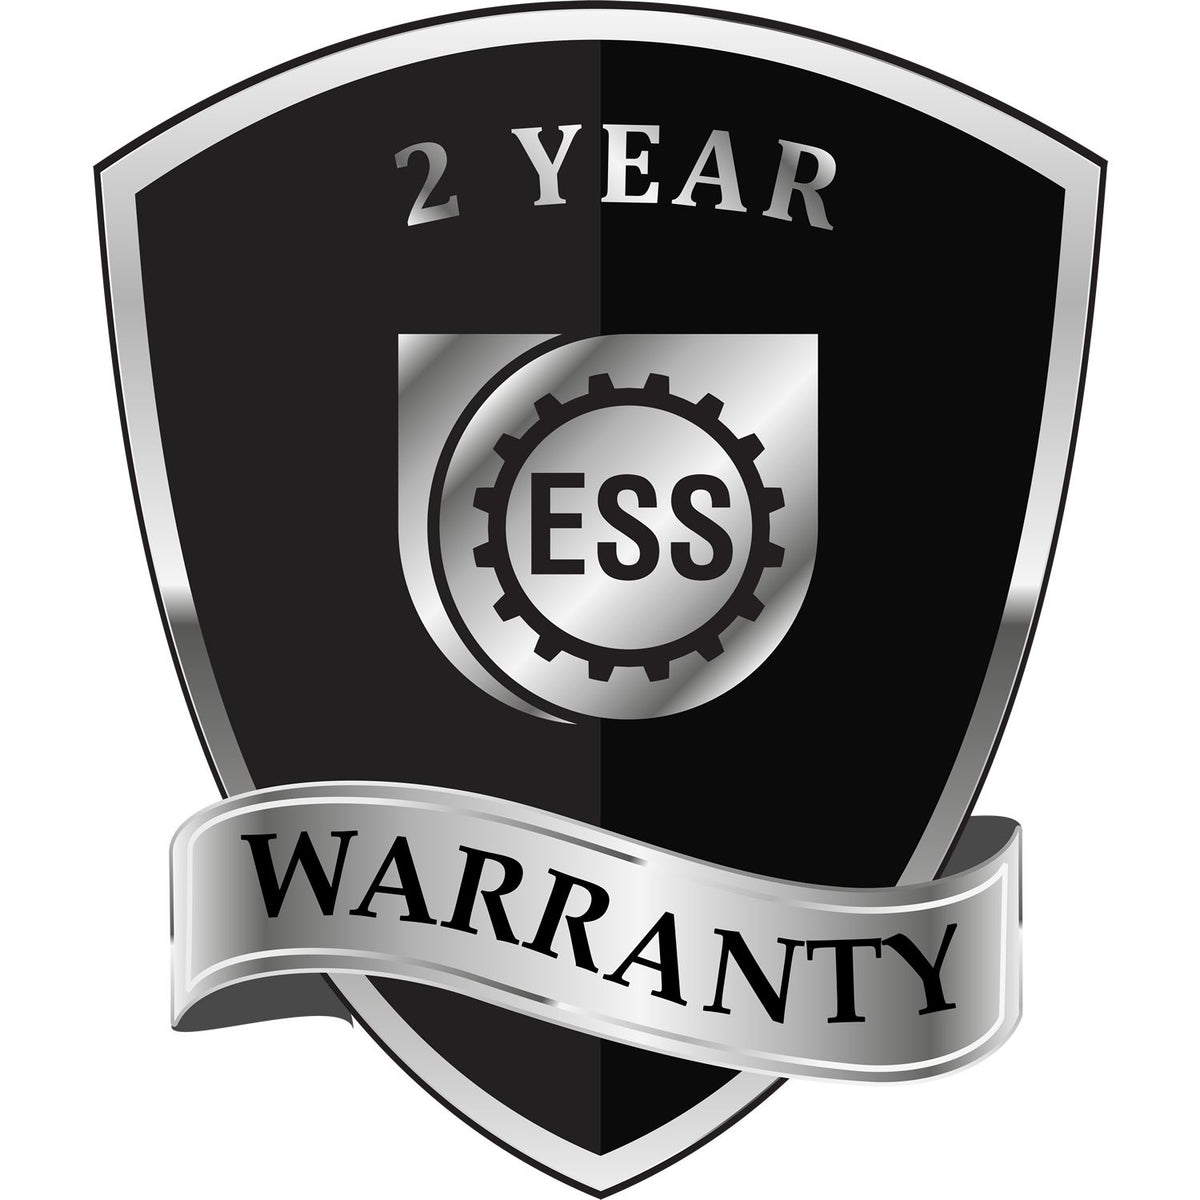 A badge or emblem showing a warranty icon for the New Jersey Engineer Desk Seal